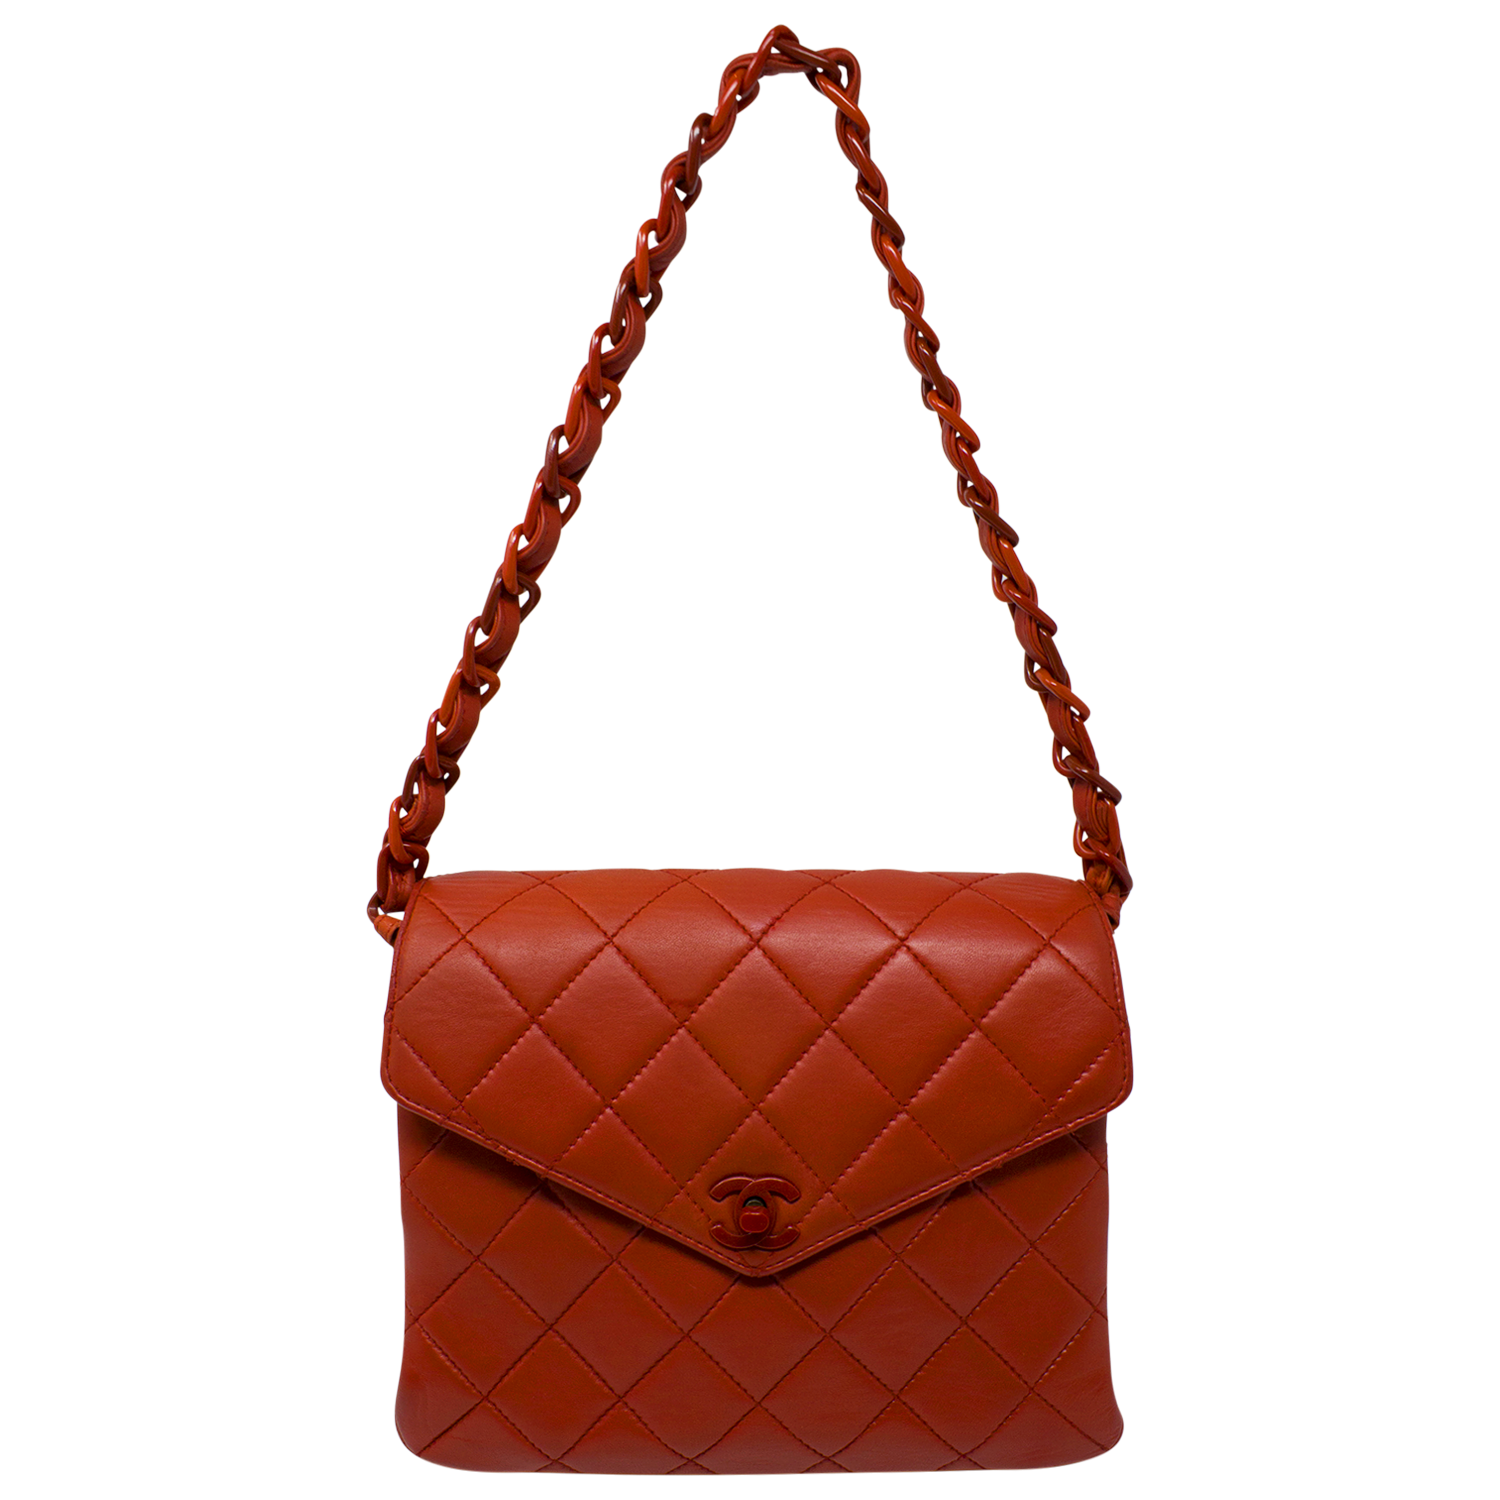 Chanel 2004 Red Quilted Monochrome Flap Bag